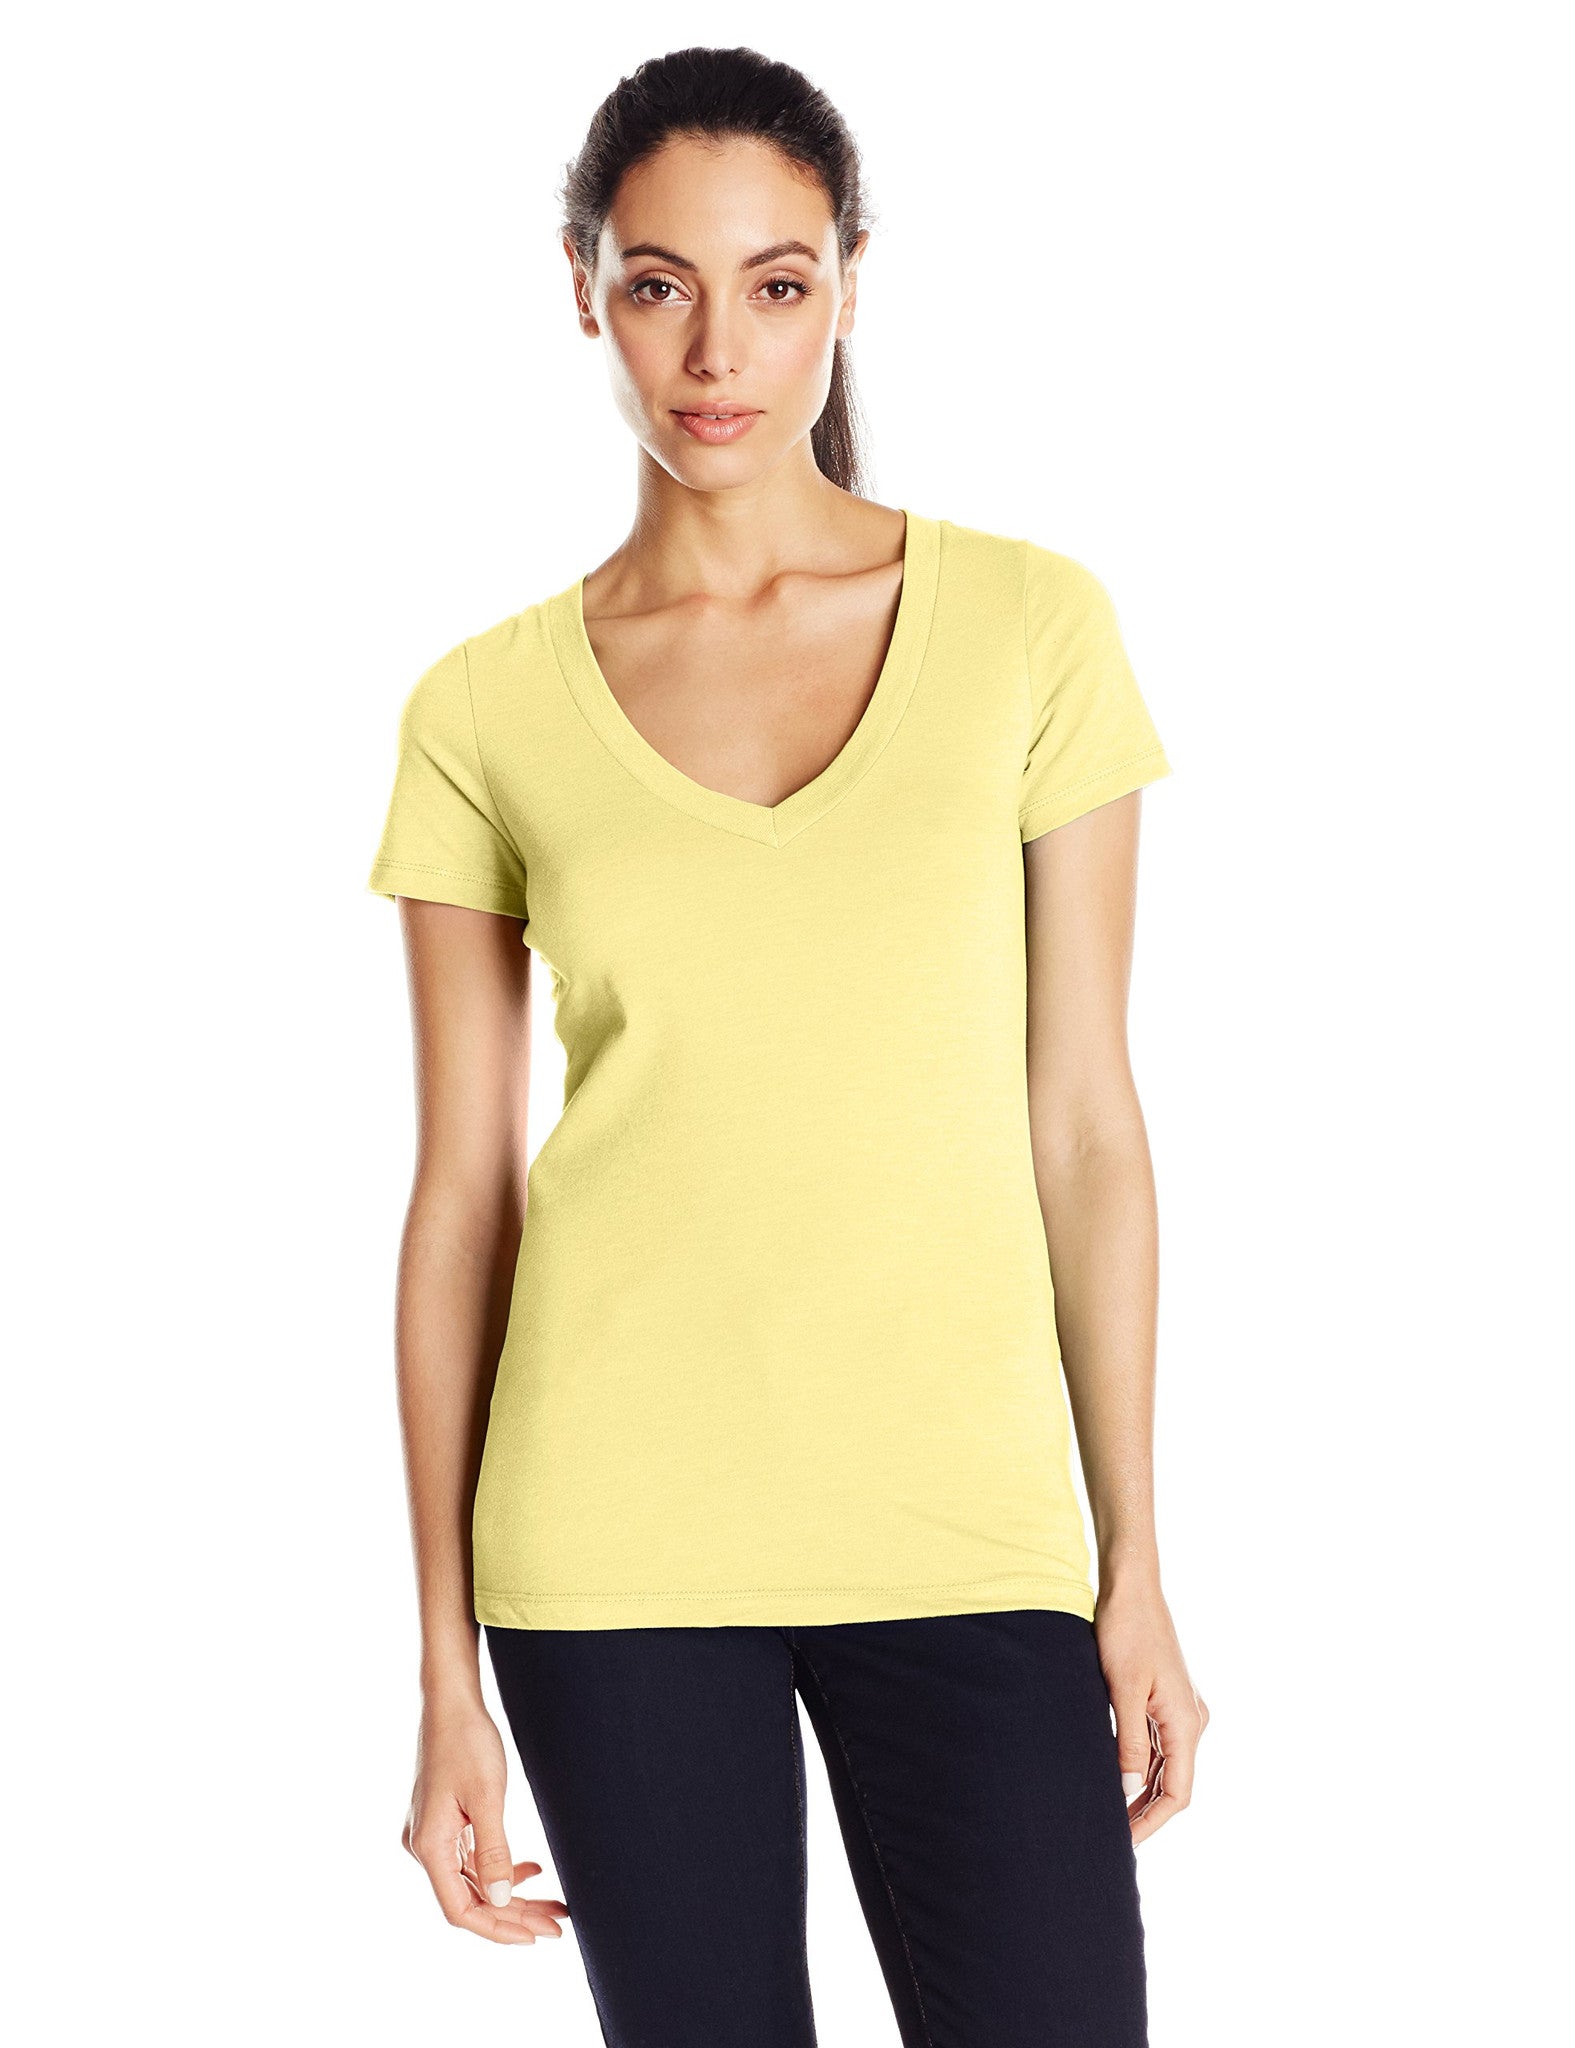 Clementine Women's Tri-Blend Scoop Neck Tee(Pack of 2)– Clementine Apparel